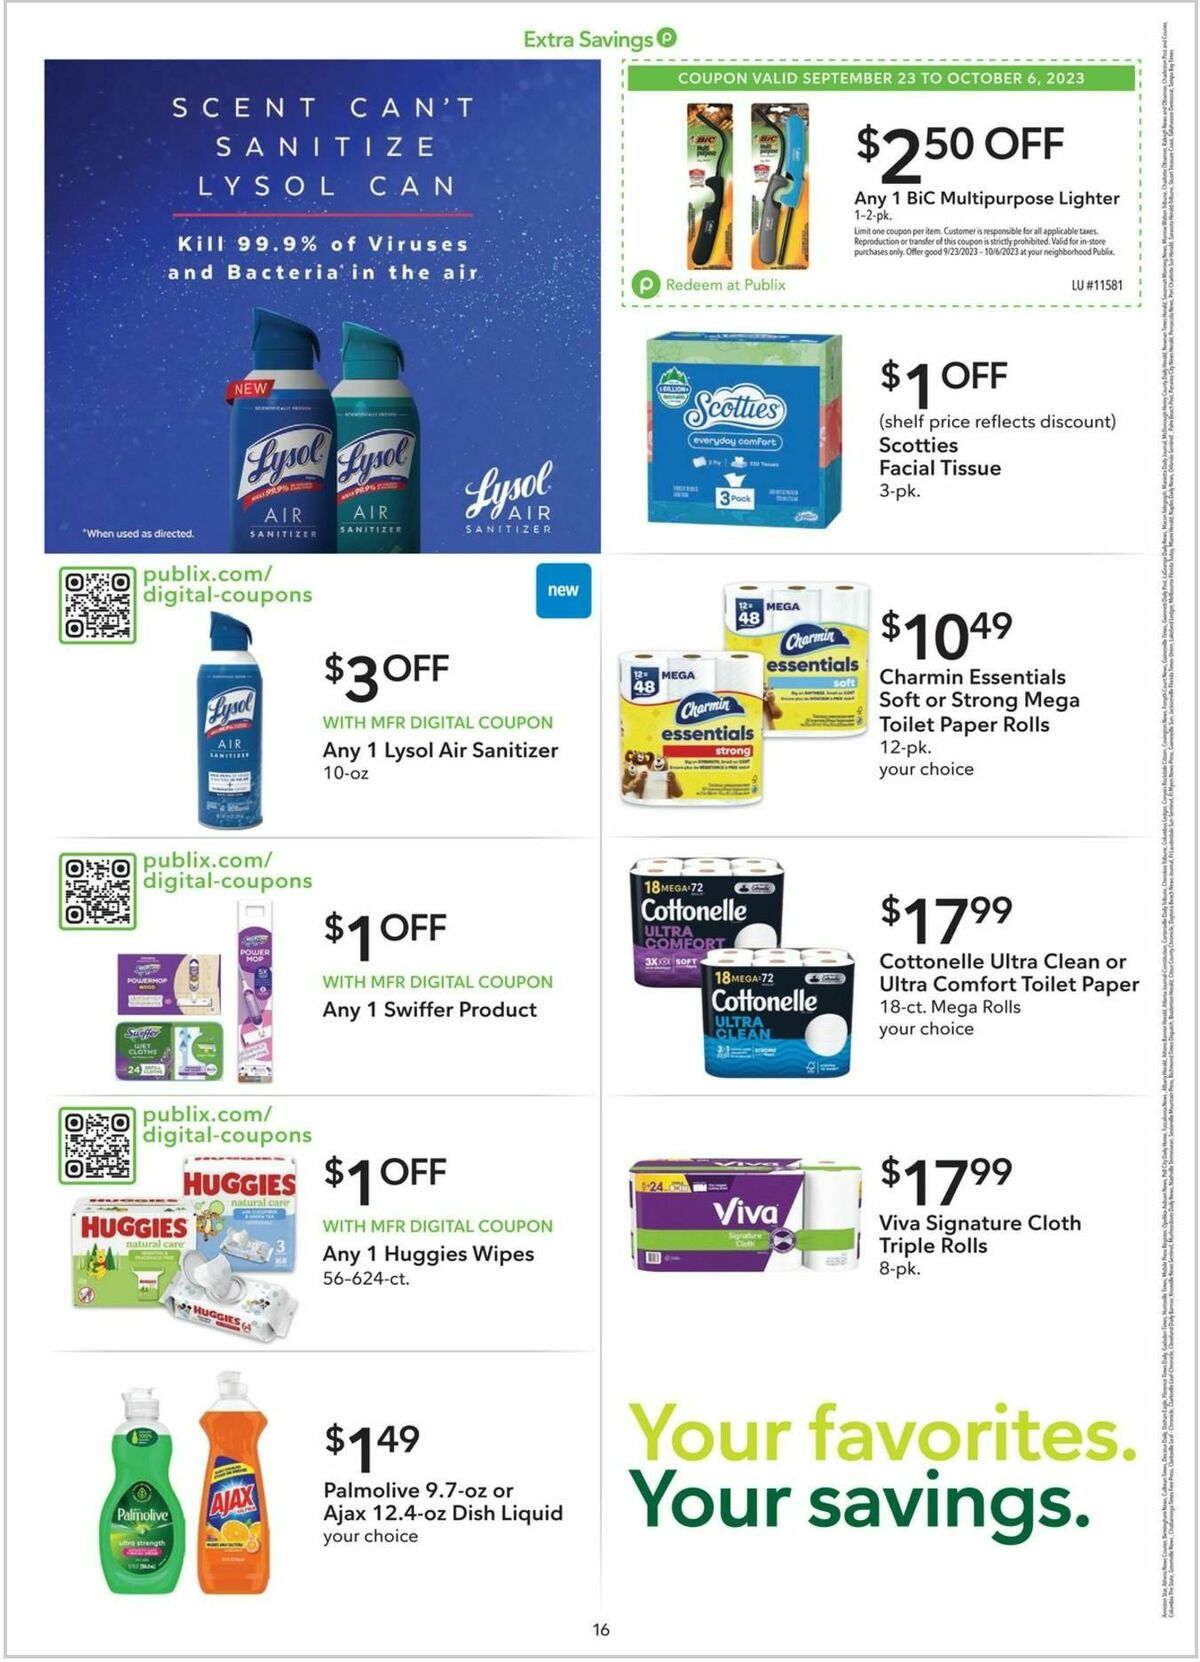 Publix Extra Savings Weekly Ad from September 23